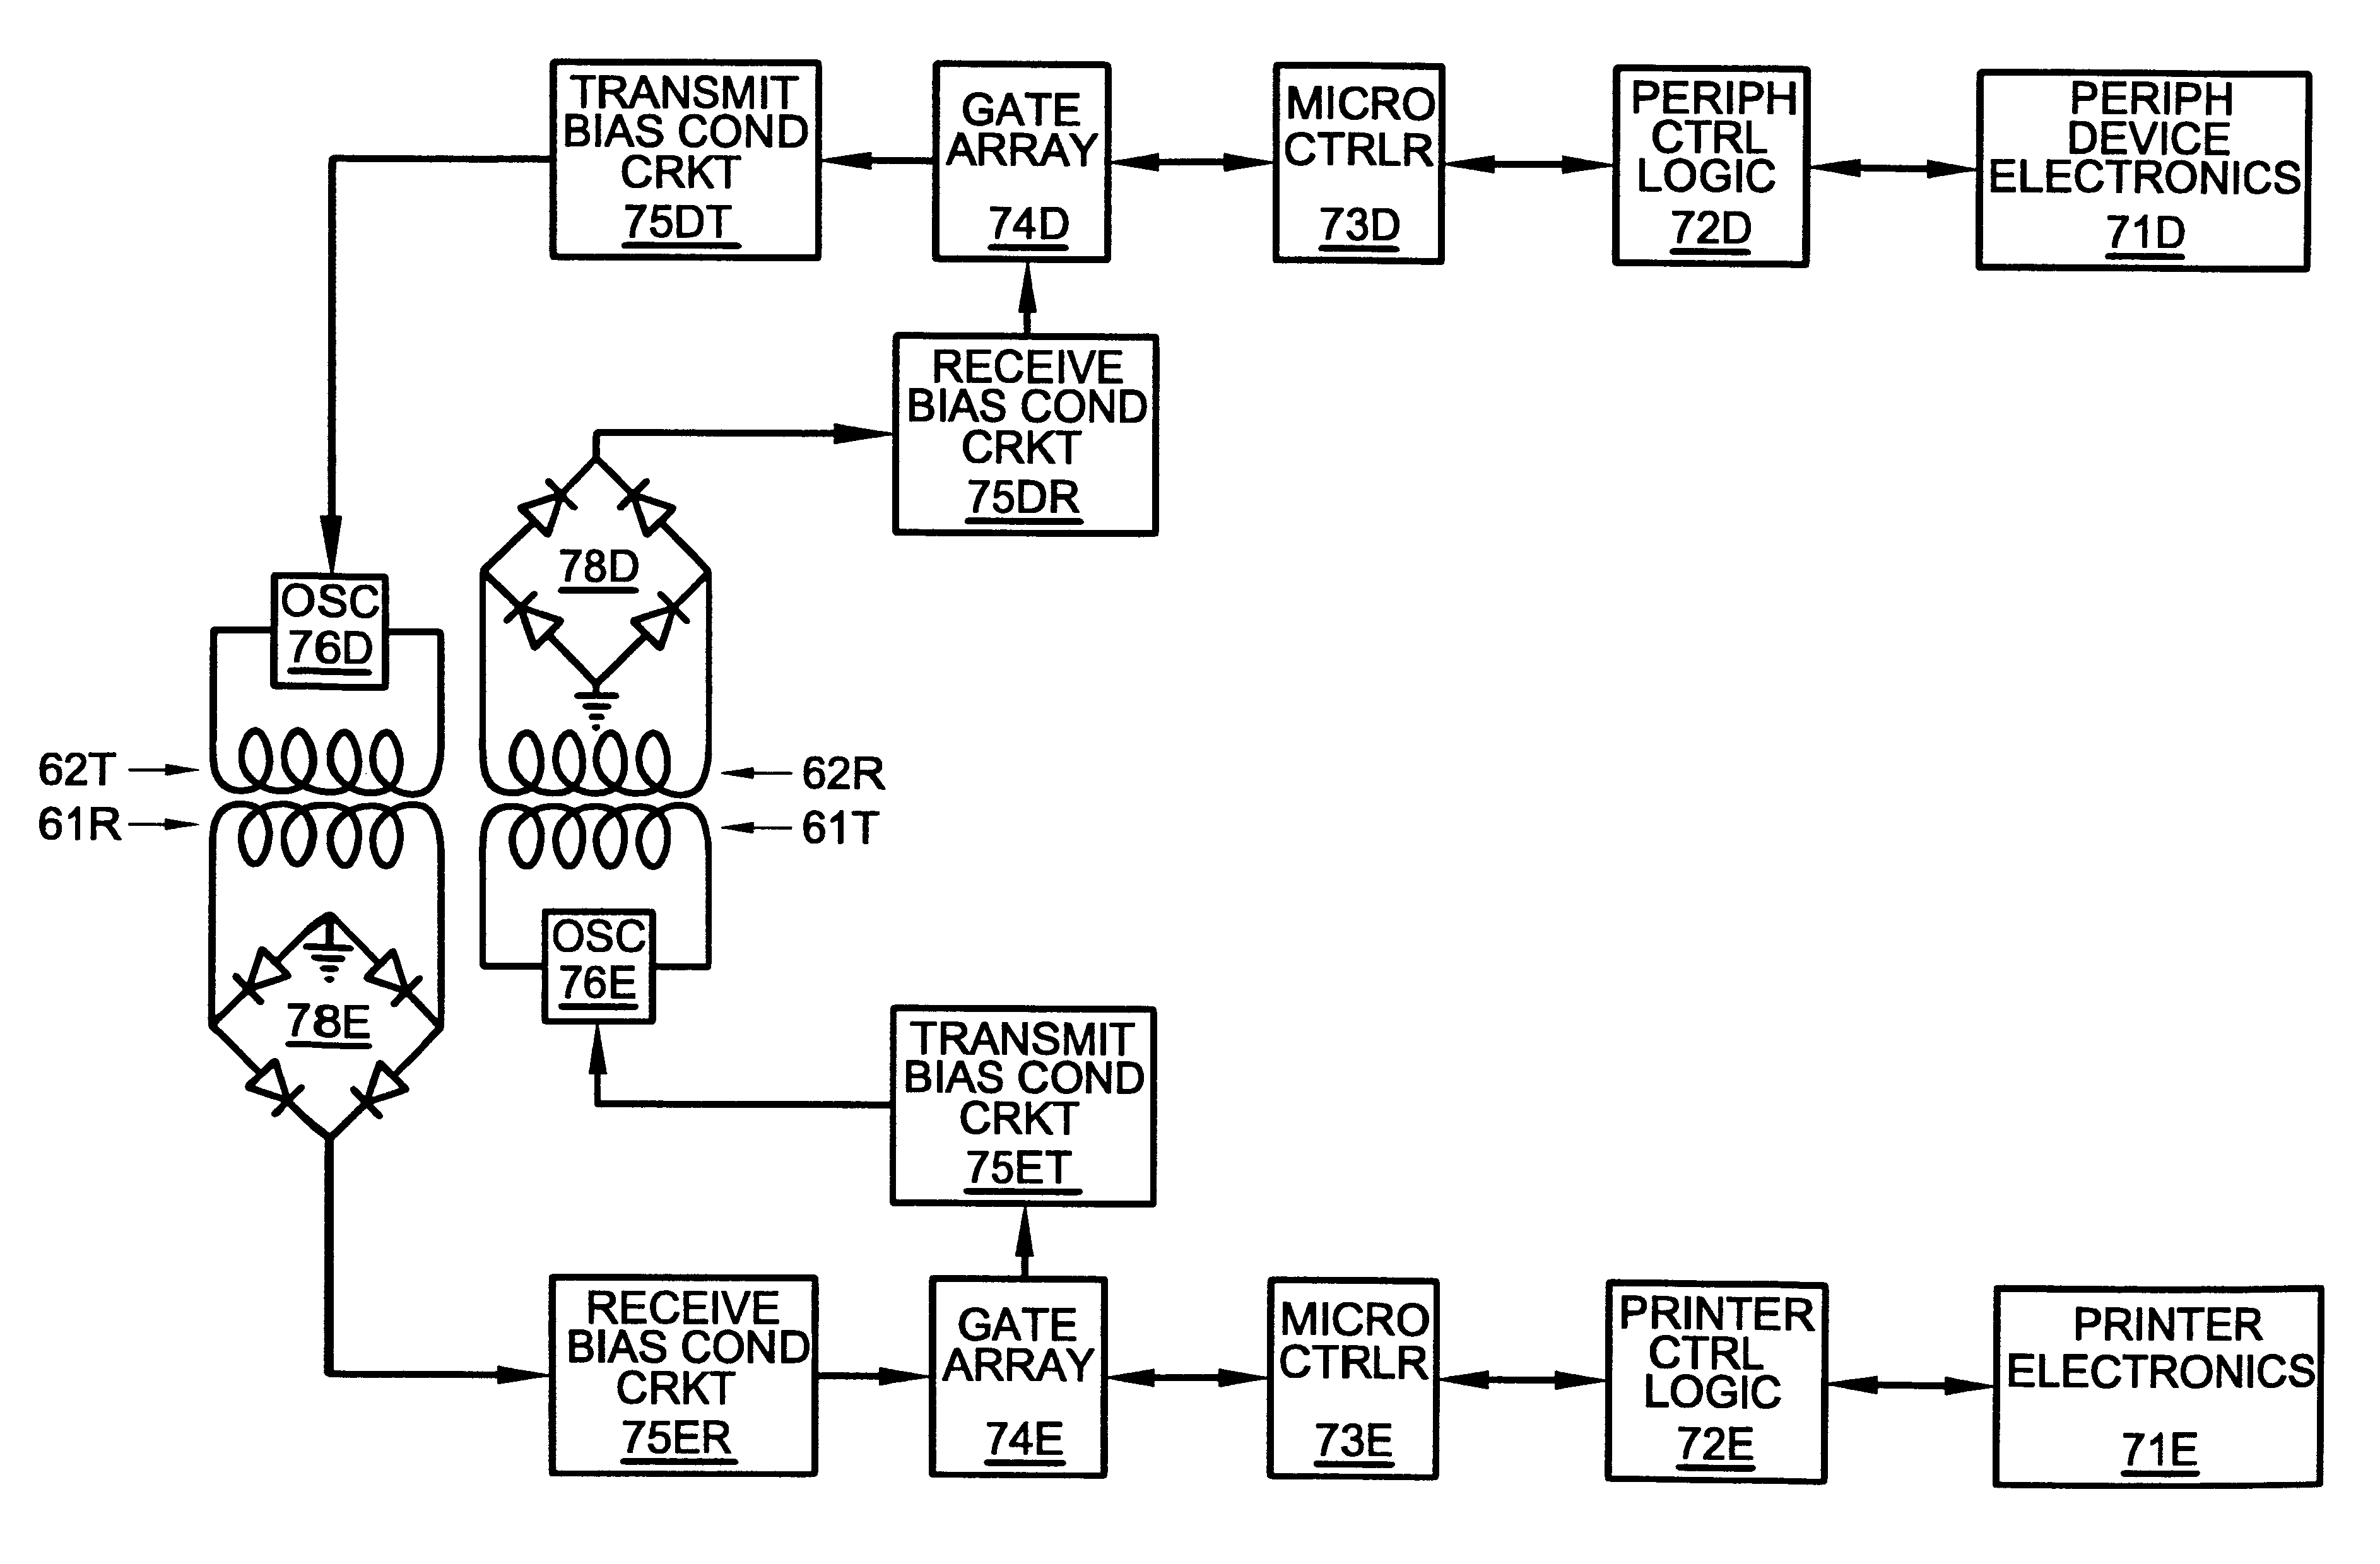 Non-contacting communication and power interface between a printing engine and peripheral systems attached to replaceable printer component